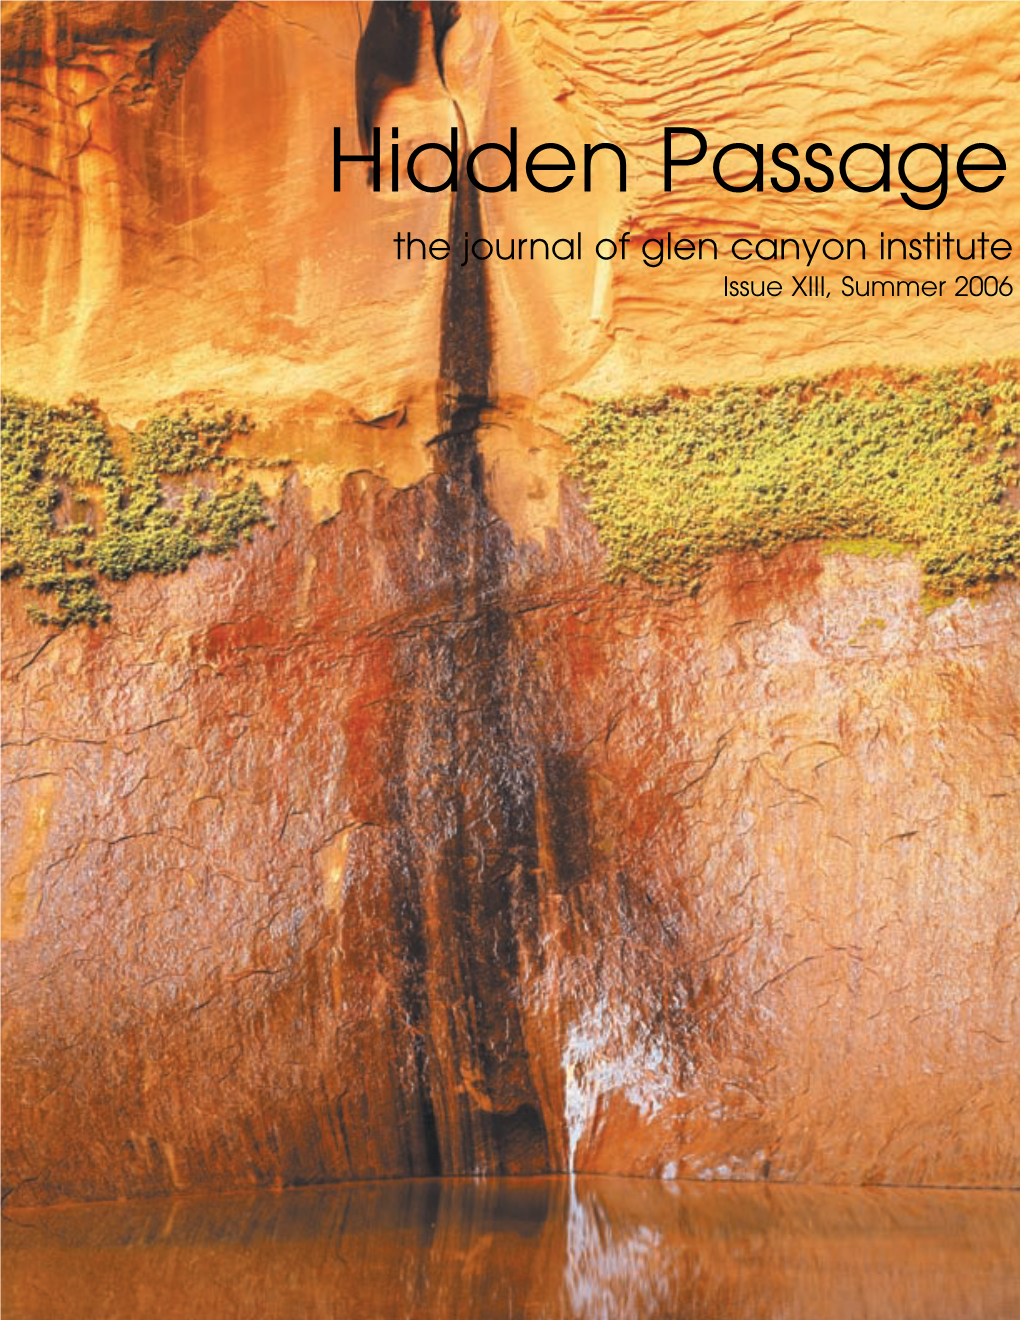 Hidden Passage the Journal of Glen Canyon Institute Issue XIII, Summer 2006 61897 Nwsltr1v5.Qxd 6/14/06 2:08 PM Page 2